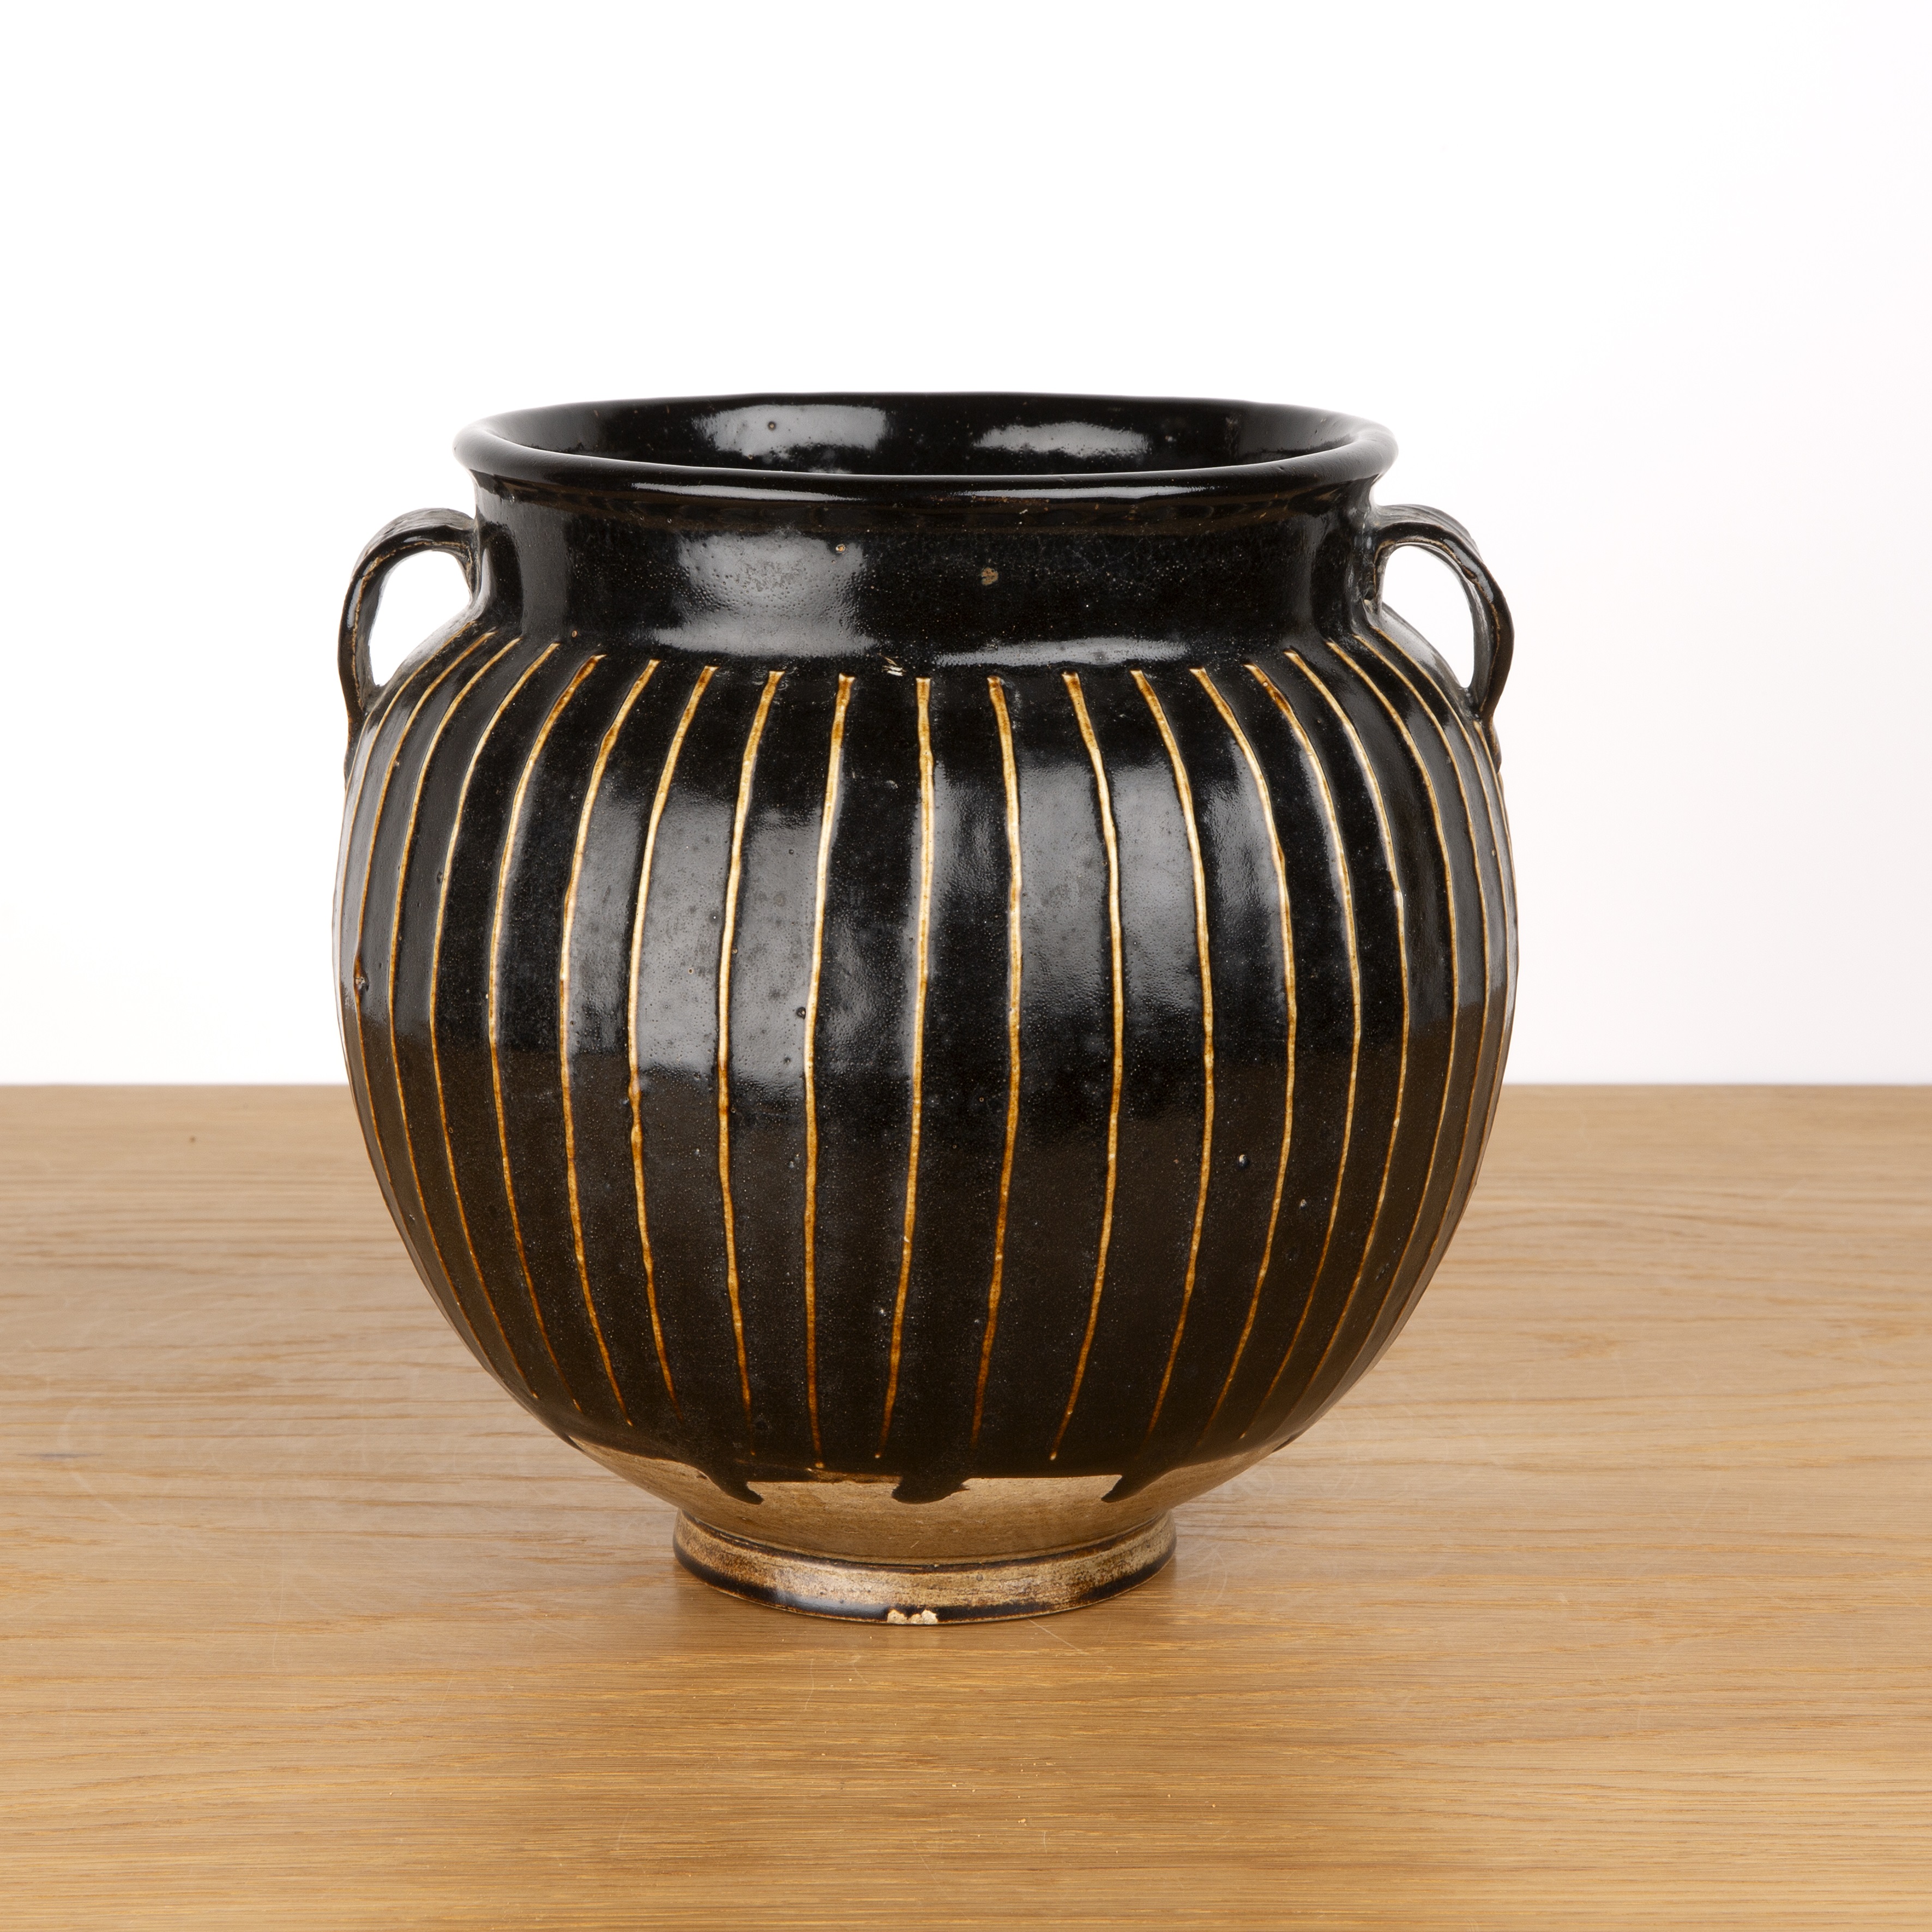 Treacle glazed two handled vase Chinese, 19th Century of reeded form with a raised foot, 22cm high